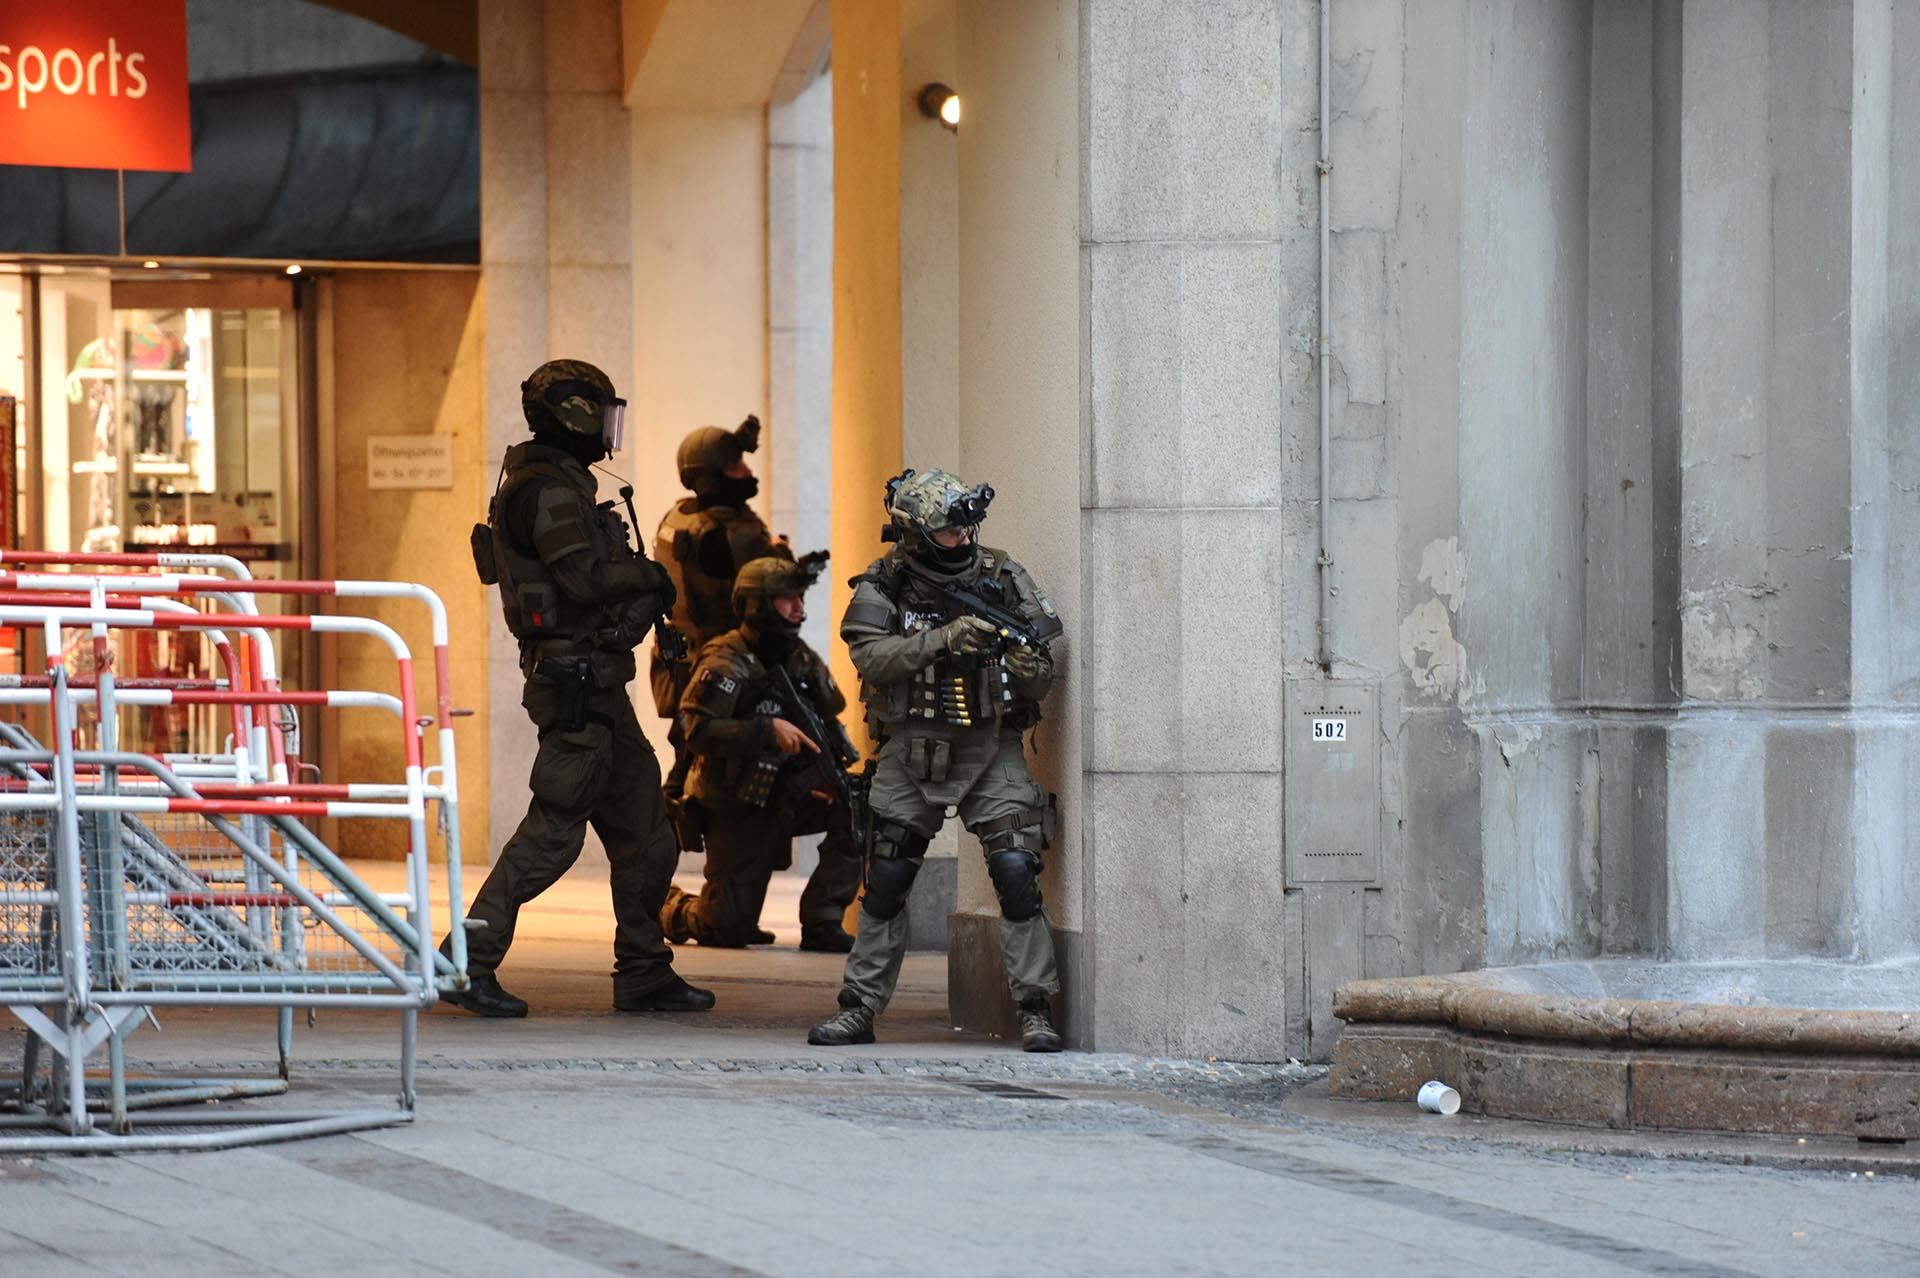 Heavily armed police forces operate at Karlsplatz (Stachus) square after a shooting in the Olympia shopping centre was reported in Munich, southern Germany, Friday, July 22, 2016. (Andreas Gebert/dpa via AP)